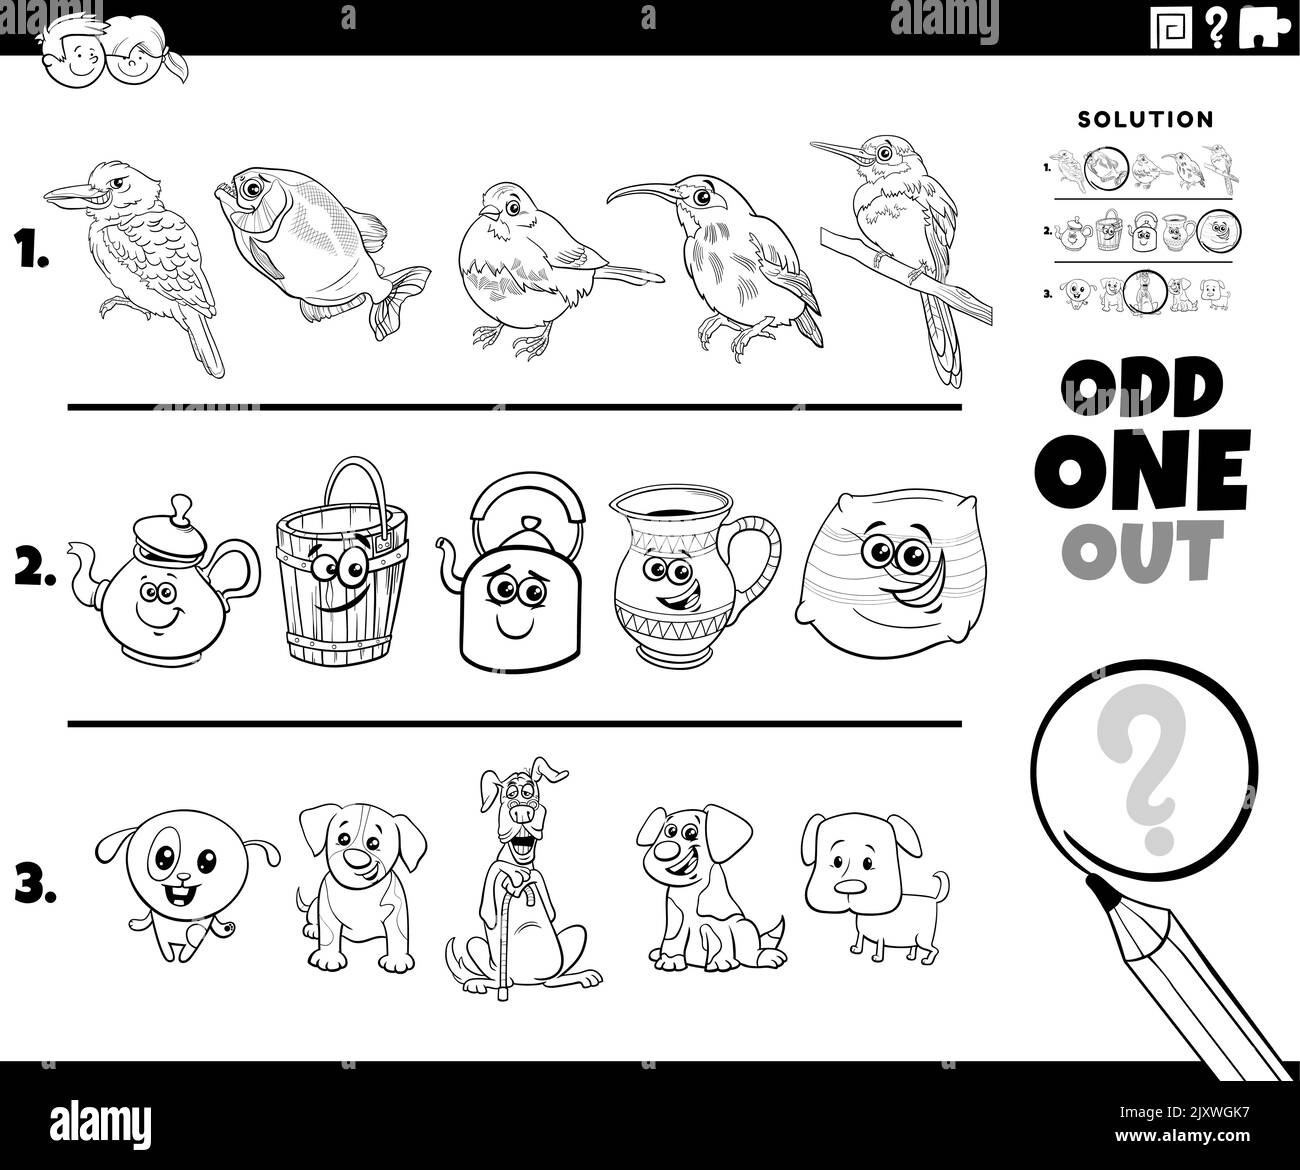 Black and white cartoon illustration of odd one out picture in a row educational activity for children with comic animal characters and objects colori Stock Vector